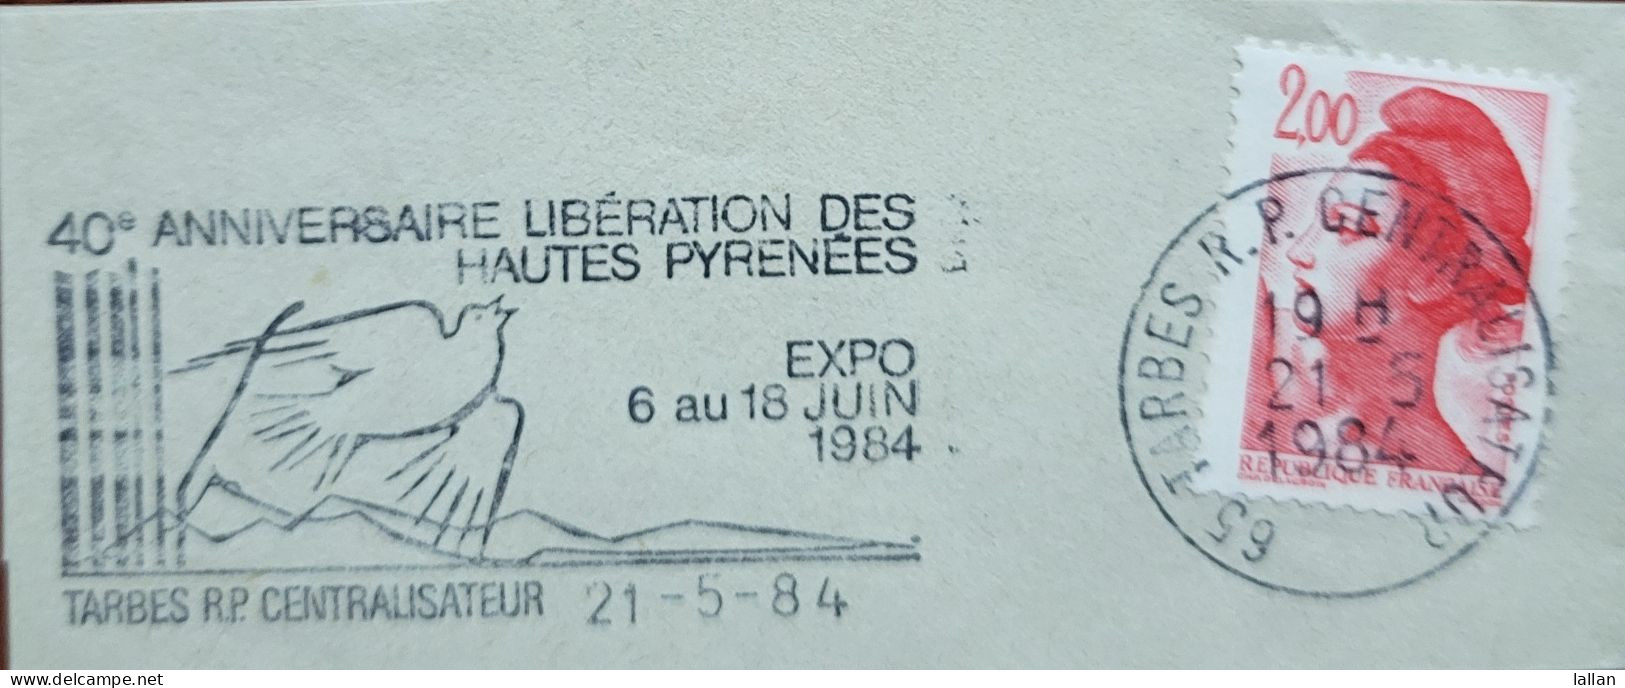 40th Anniversaire Liberation Des Hautes Pyrenees ,84, Condition As Per Scan LPS5 - Covers & Documents